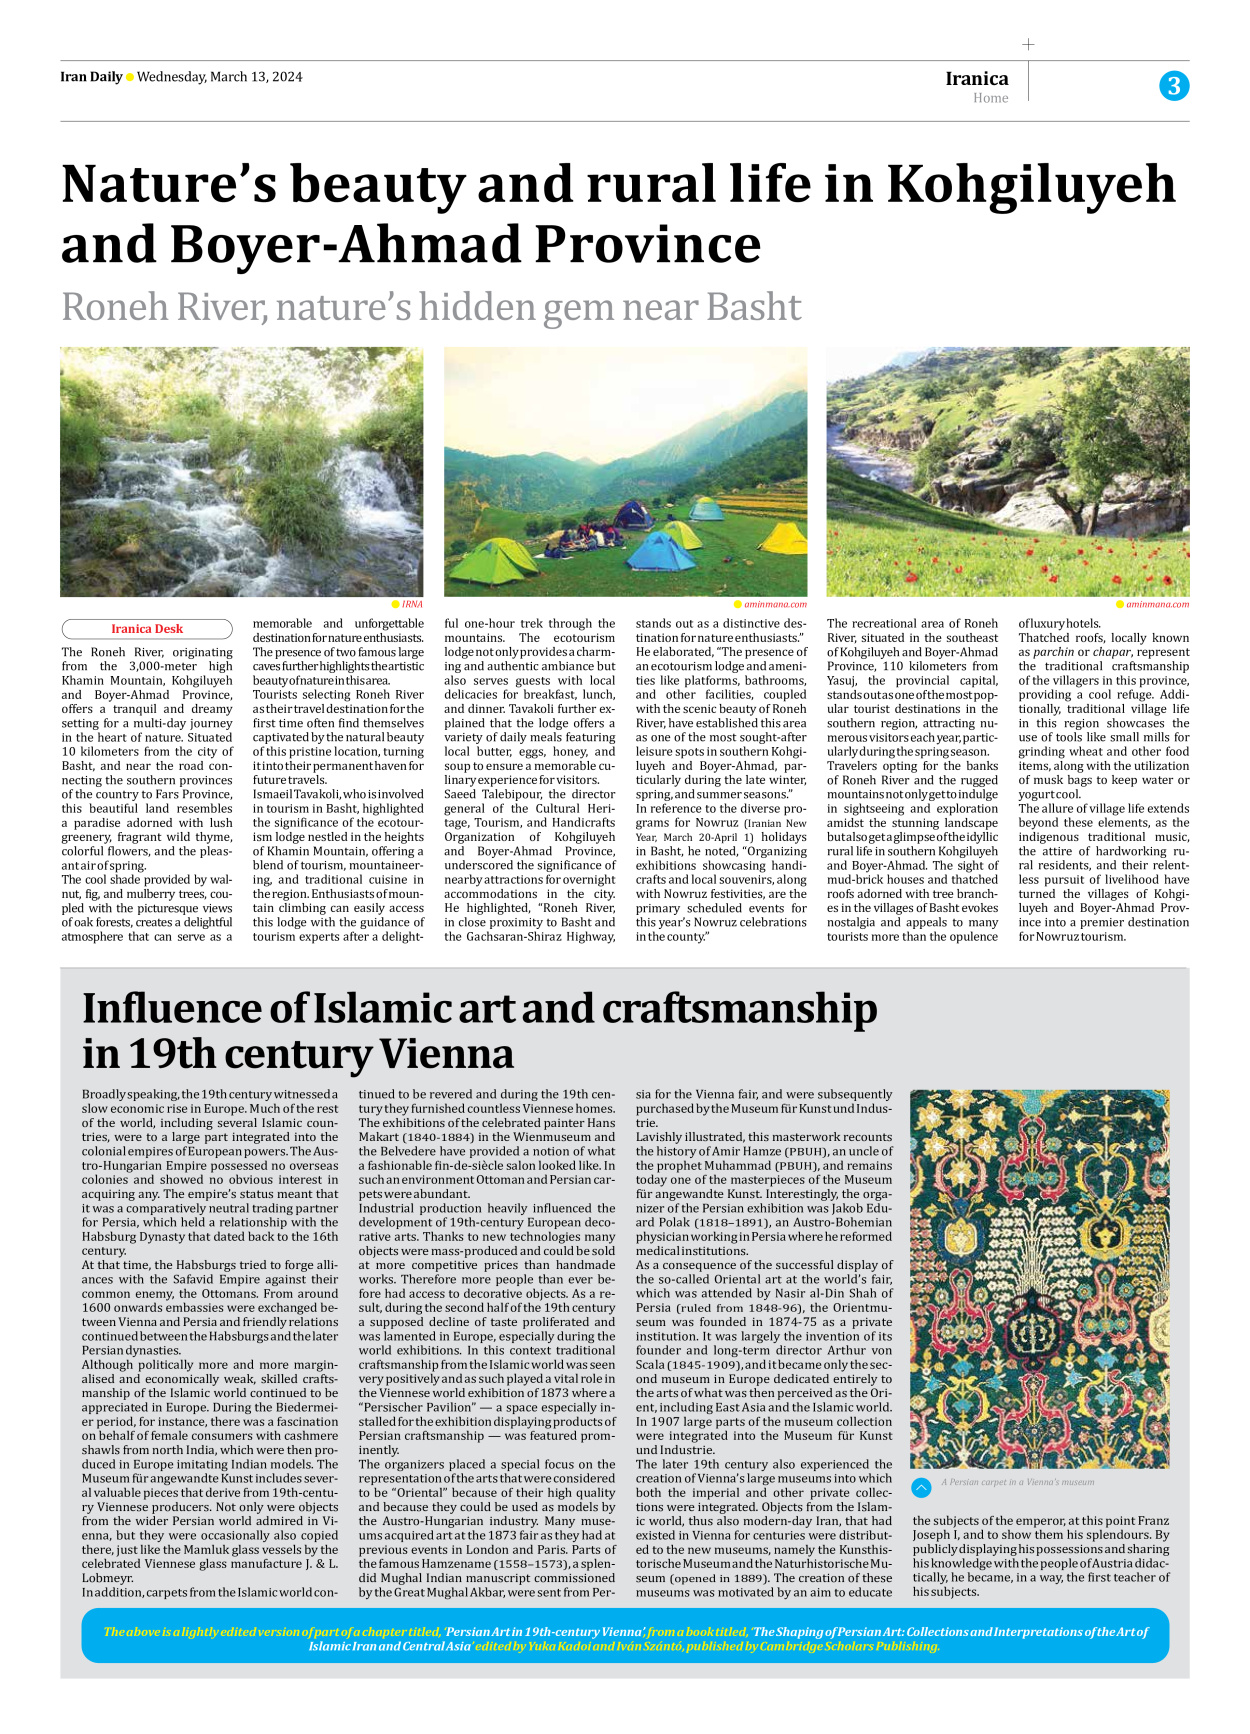 Iran Daily - Number Seven Thousand Five Hundred and Twenty Nine - 13 March 2024 - Page 3